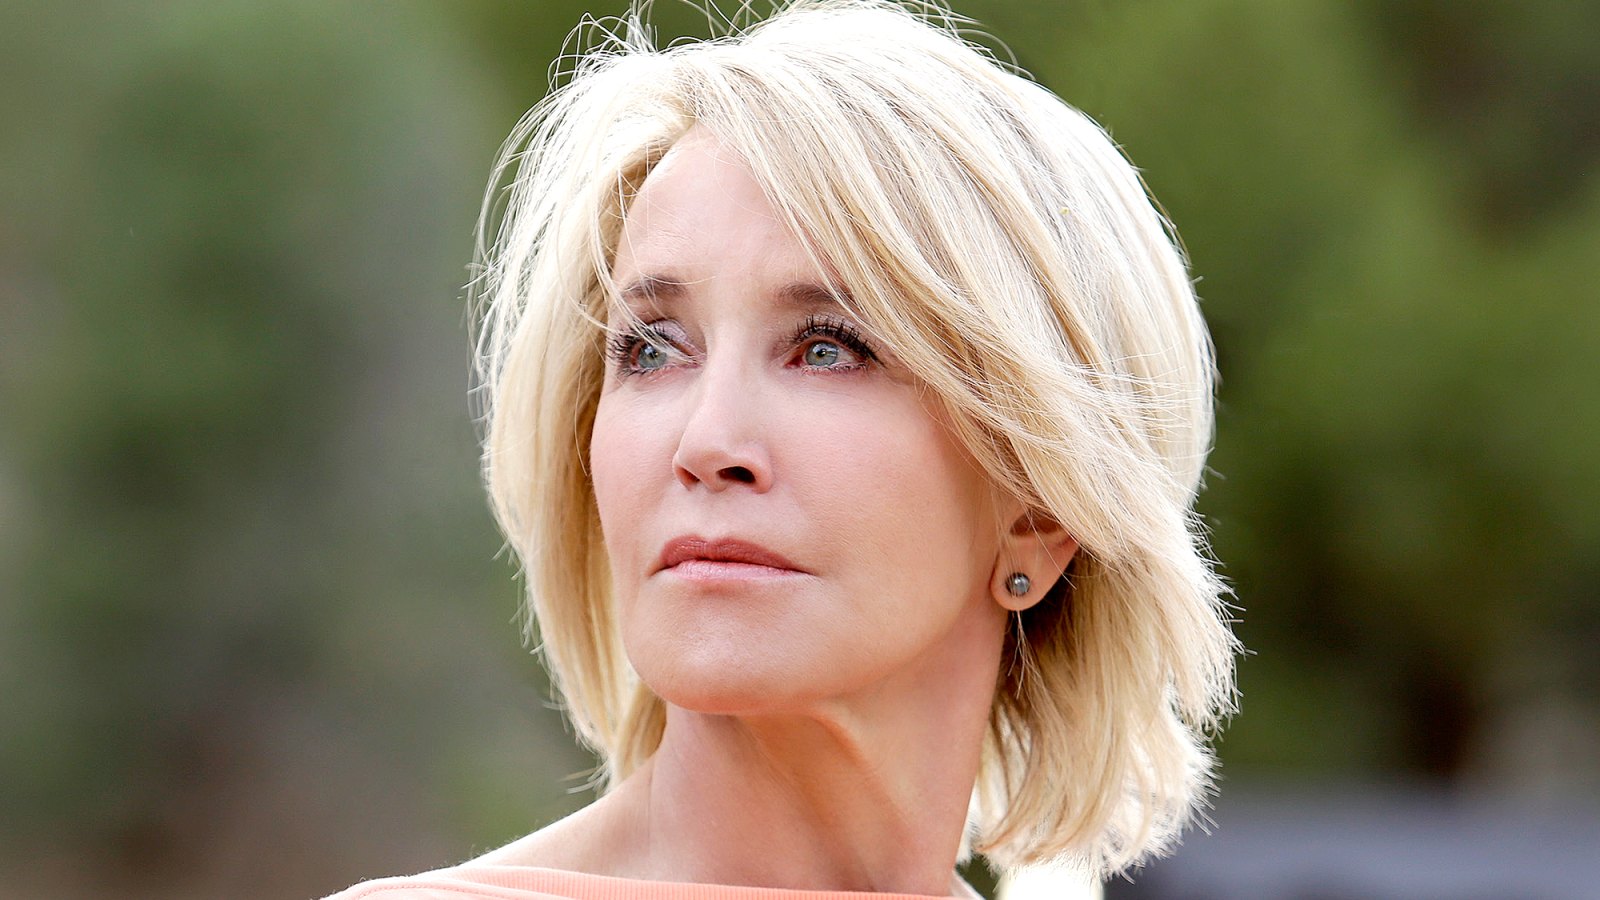 Felicity-Huffman-Is-Facing-4-10-Months-in-Prison-After-Guilty-Plea